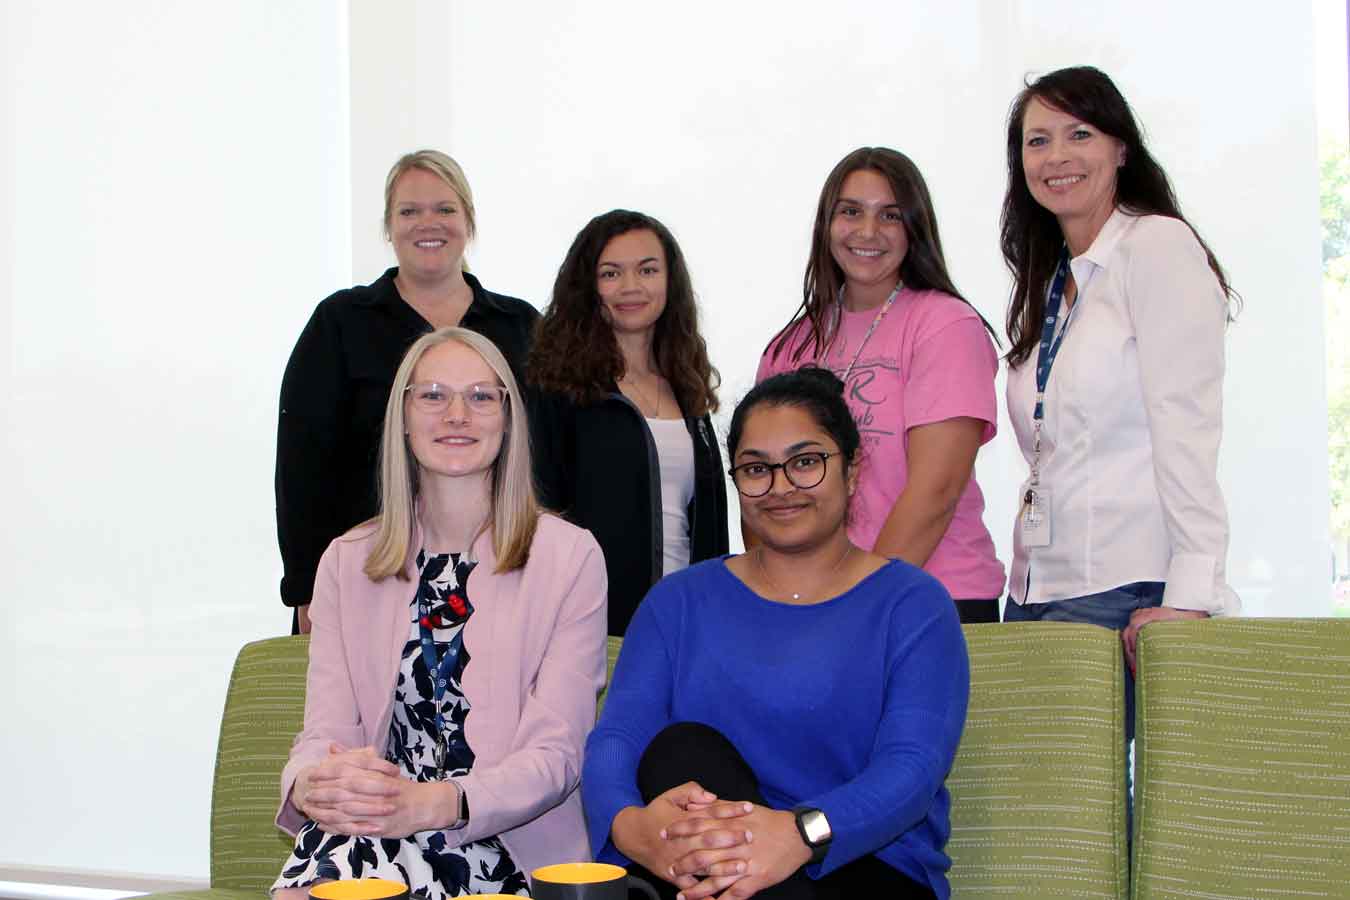 Dakota State students and staff attending the WiCyS conference are Dr. Ashley Podhradsky (back left), Annabelle Klosterman, Janessa Palmieri, Dr. Arica Kulm; Abigail Witt (front left) and Kanthi Narukonda. Not pictured are: Alexis Kulm, Katie Shuck, Kinsey Pickering, and Sara Stehlik. 